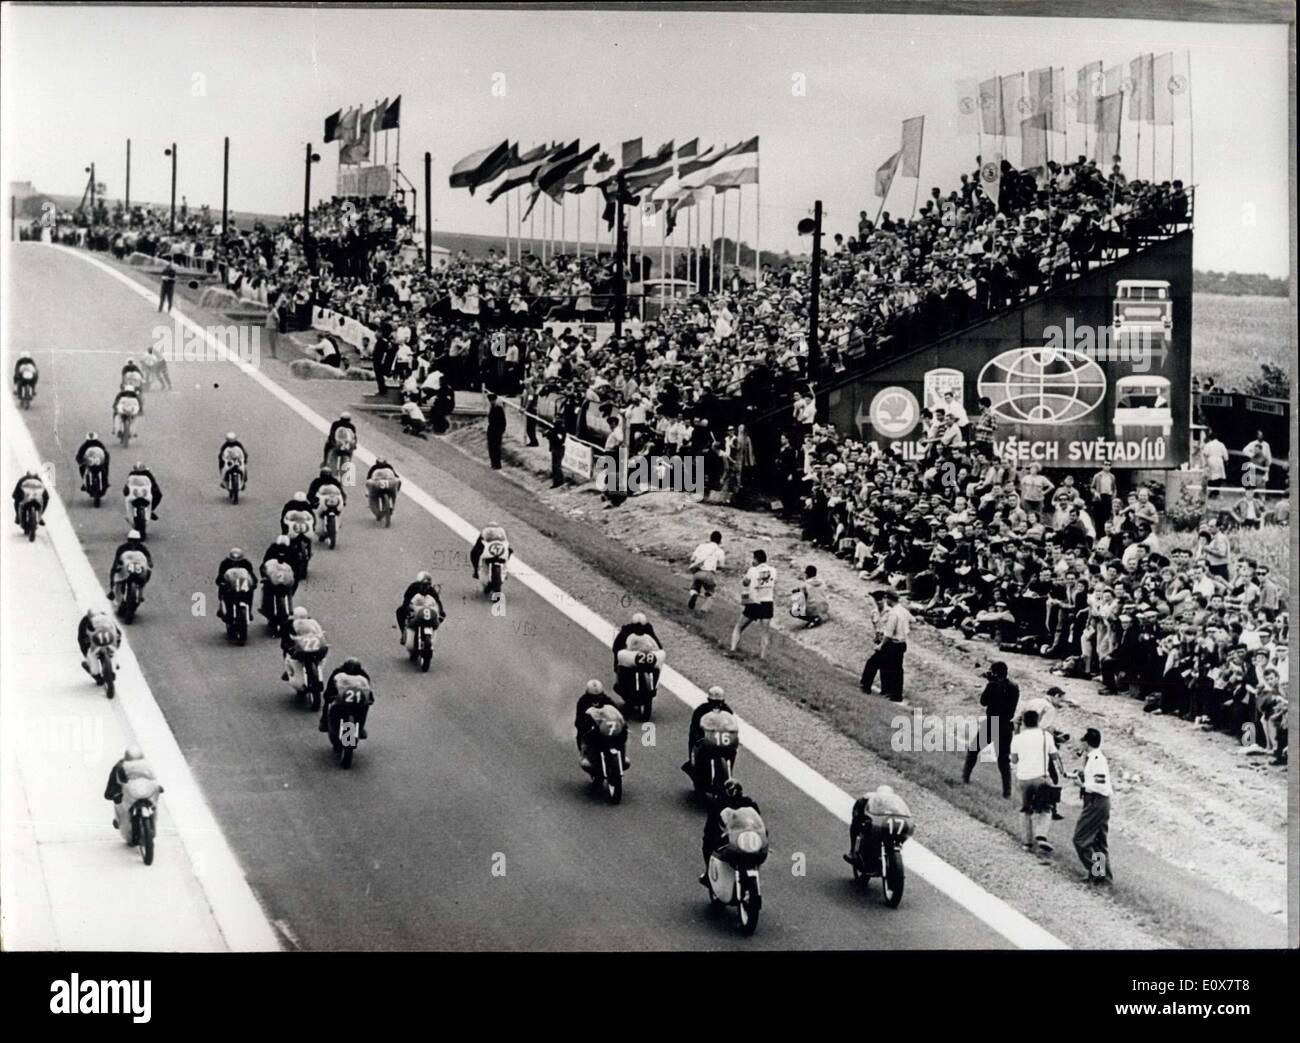 Jul. 30, 1965 - Motor Cycle Grand Prix in Czechoslovakia: The Motor Cycling Grand Prix of Czechoslovakia, the 9th event in the World Championships, took place last Sunday at Brno (Southern Moravia). Many of the world's finest riders competed. Photo shows the start of the 350 cc event at Brne. Stock Photo